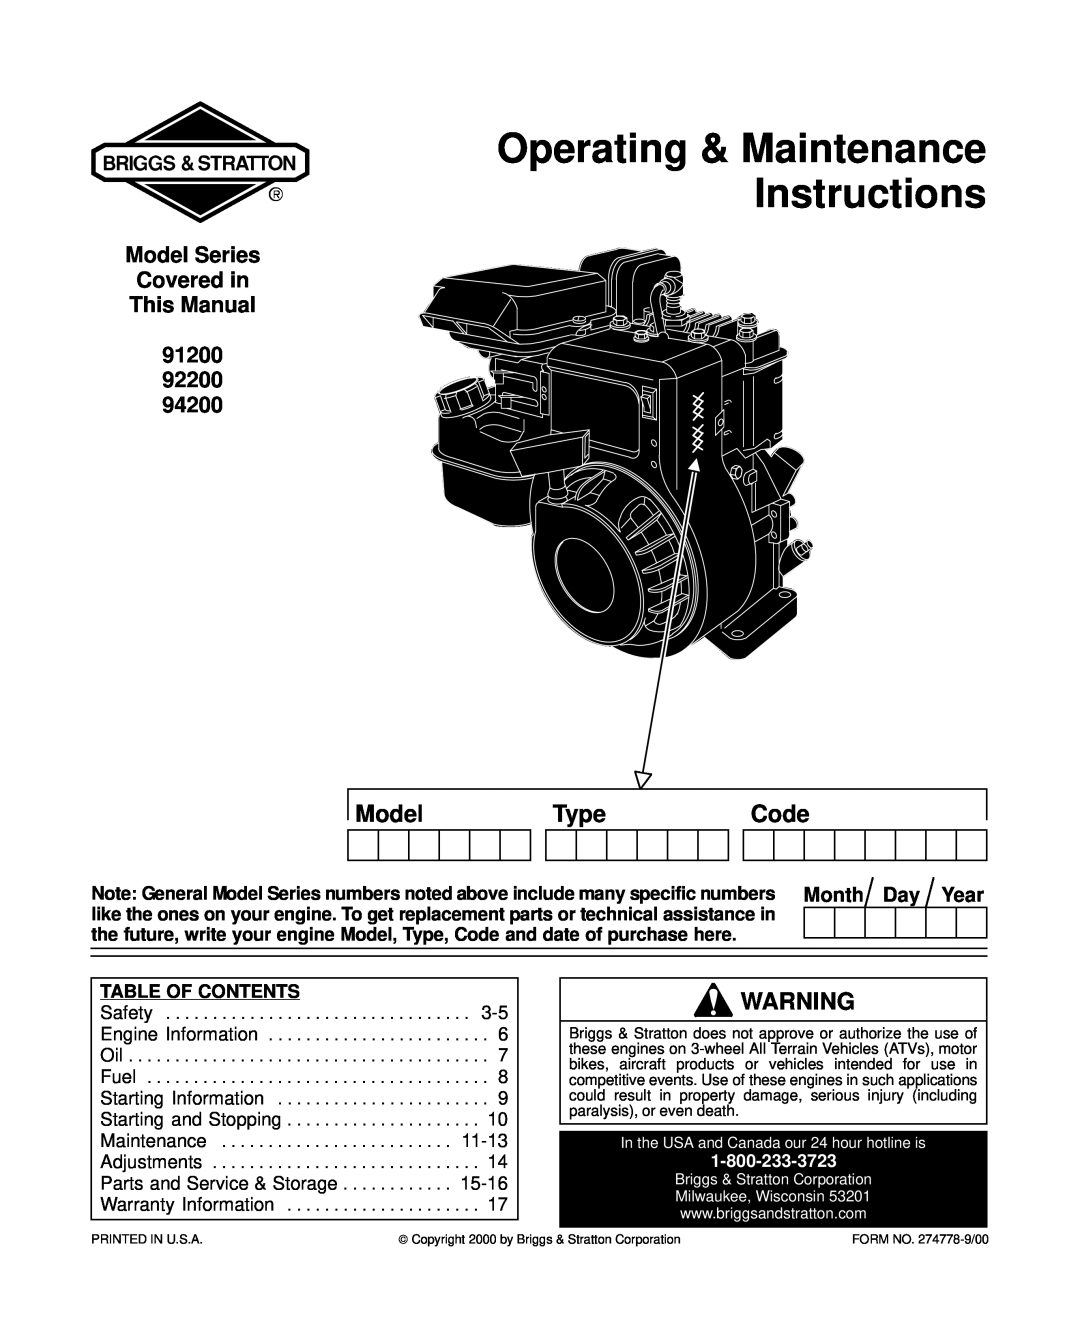 Briggs & Stratton 91200, 92200, 94200 warranty Model, Type, Code, Month Day Year, Table Of Contents, Maintenance, 11-13 